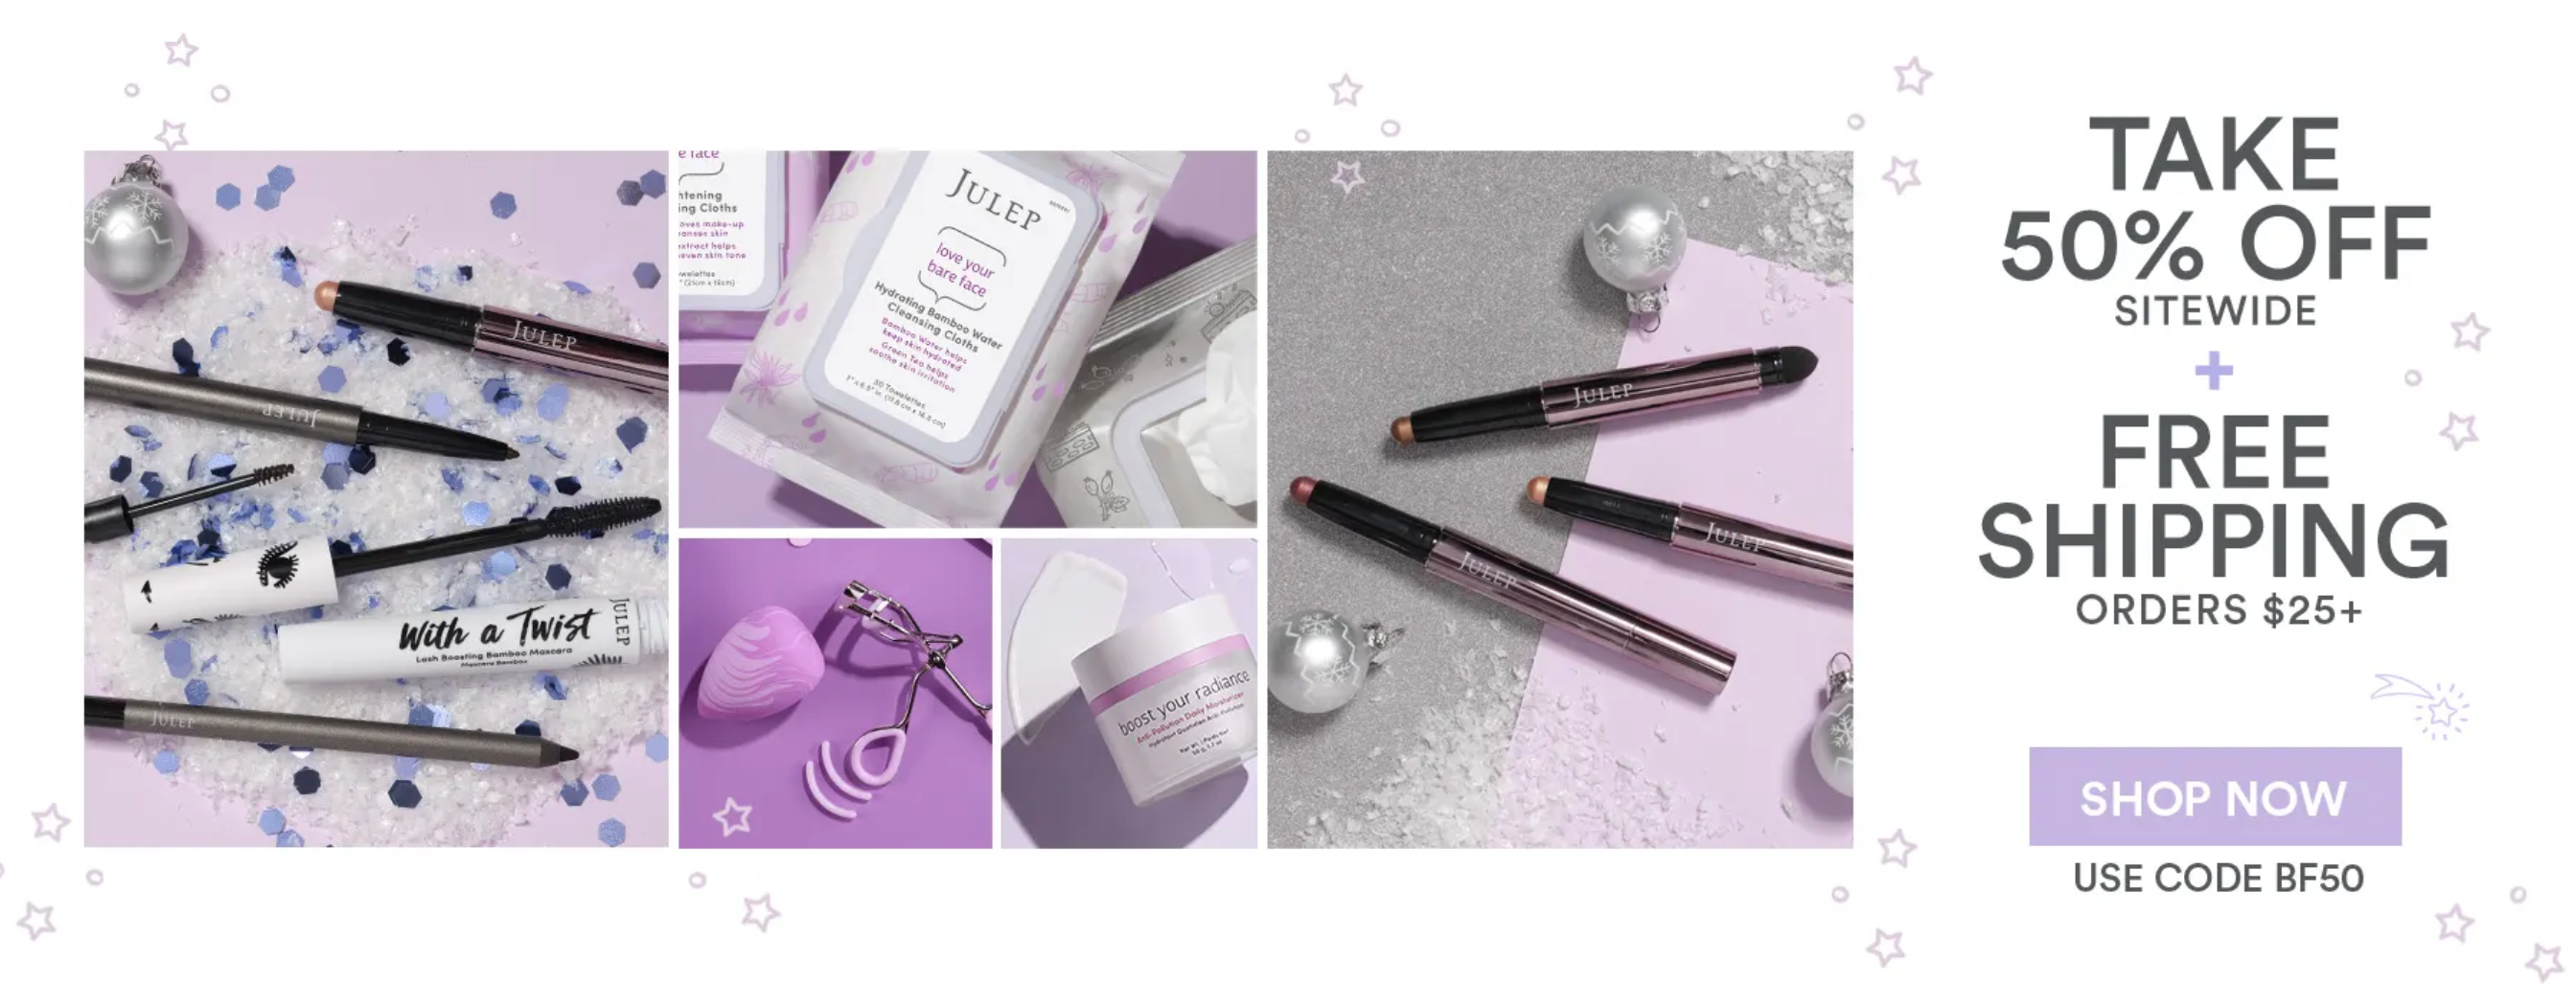 Julep Black Friday 2019 Deal – 50% Off Sitewide!